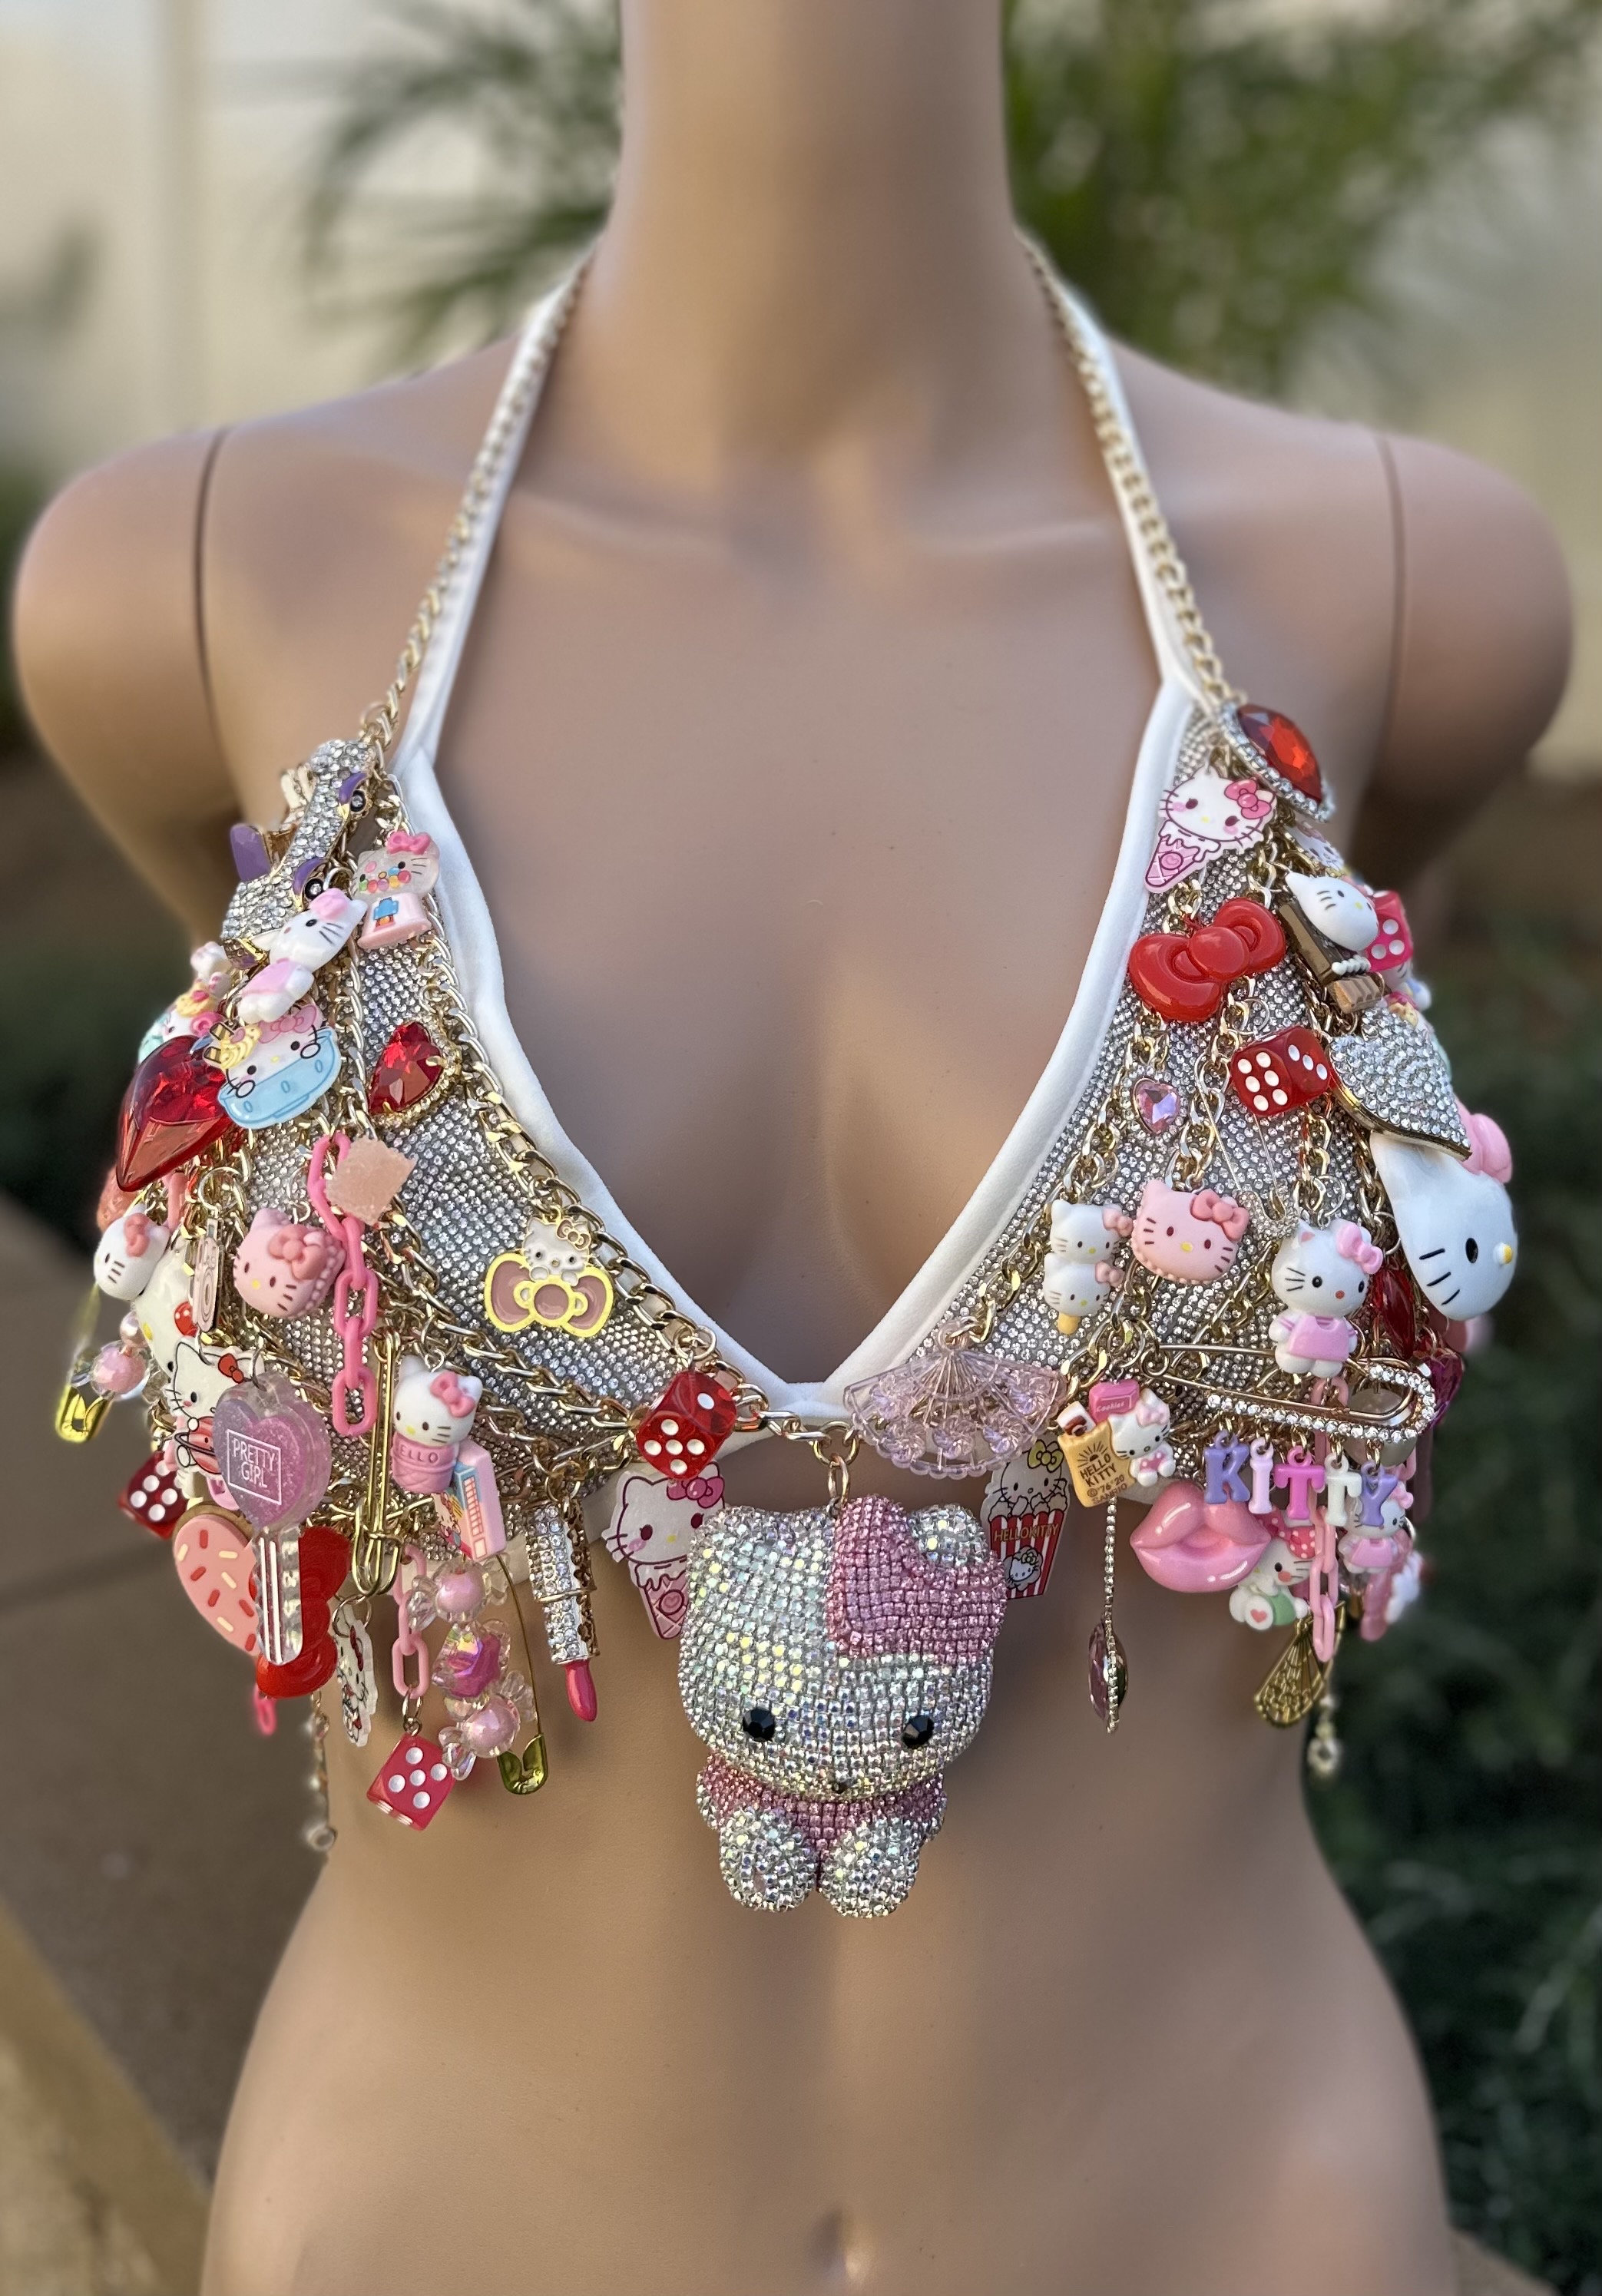 Shiny Rhinestone Body Chain Bra Necklace Harness Sexy Crystal Bralette For  Women Perfect Gift For Bikini, Breast, And Waist The Other Way Around  Stonefans Jewelry L231004 From Sunglasses_designer_, $2.97